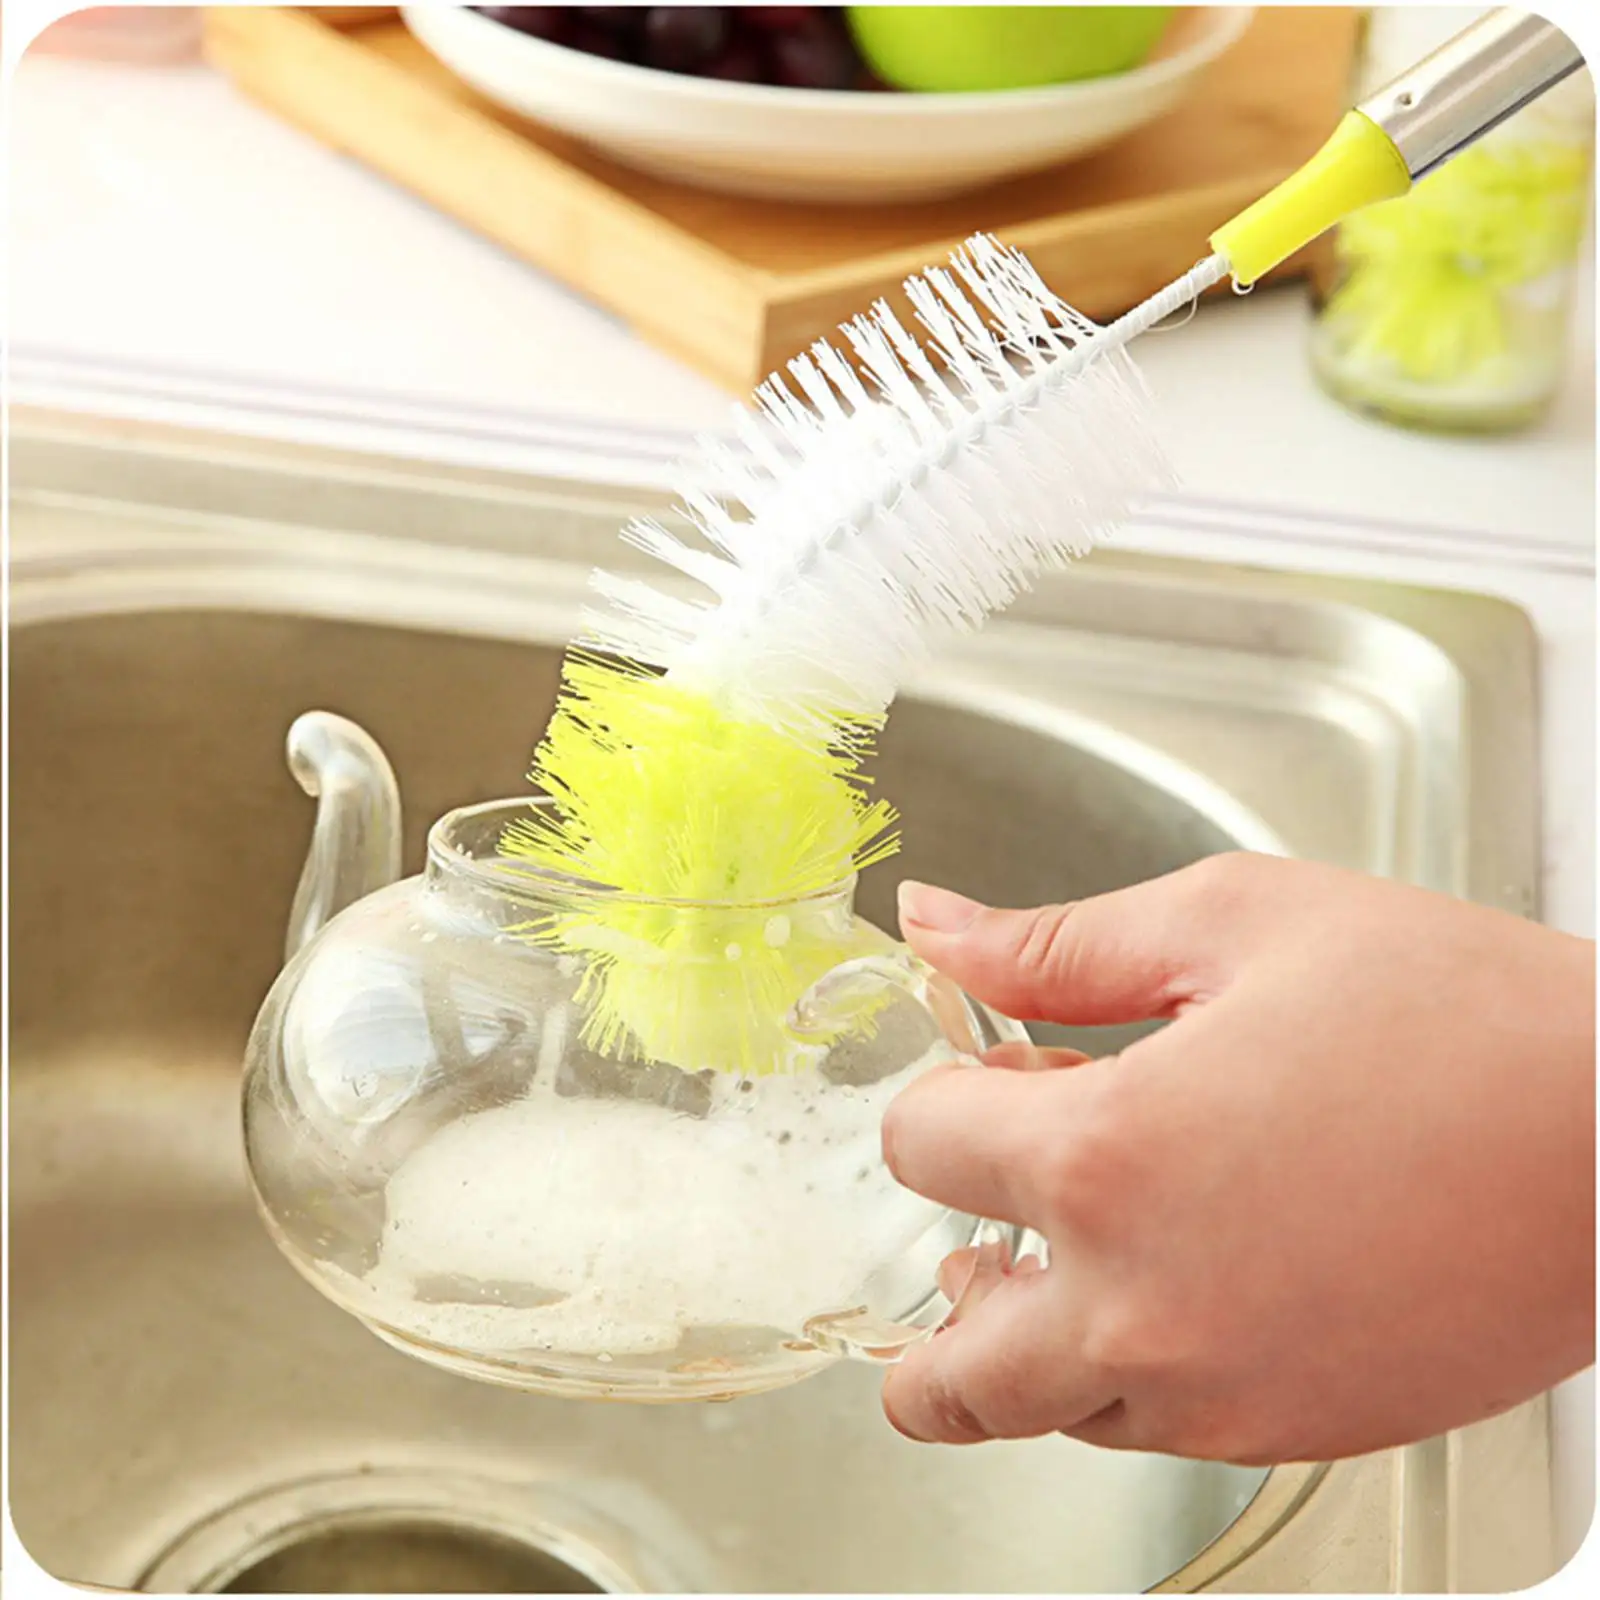 New 2 X Long Handle BOTTLE BRUSH Cleaning Kitchen Brew Scrubbing Cleaner Tool ✔ 